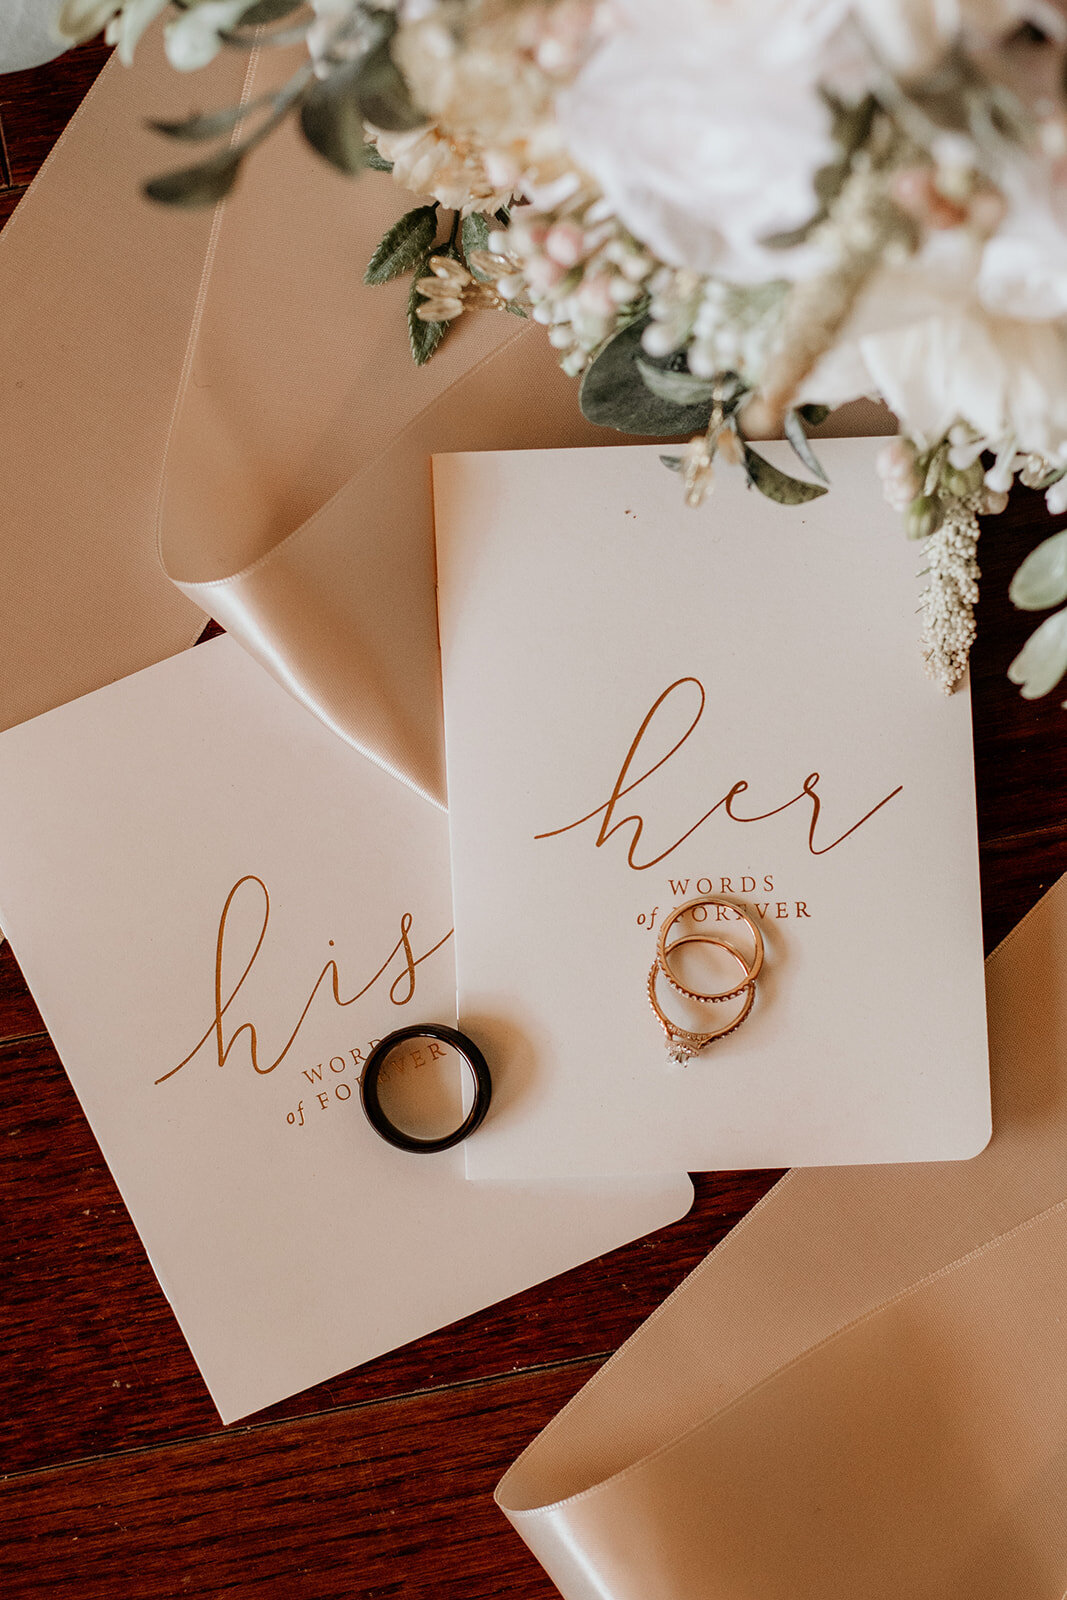 his and hers vow books wih wedding rings